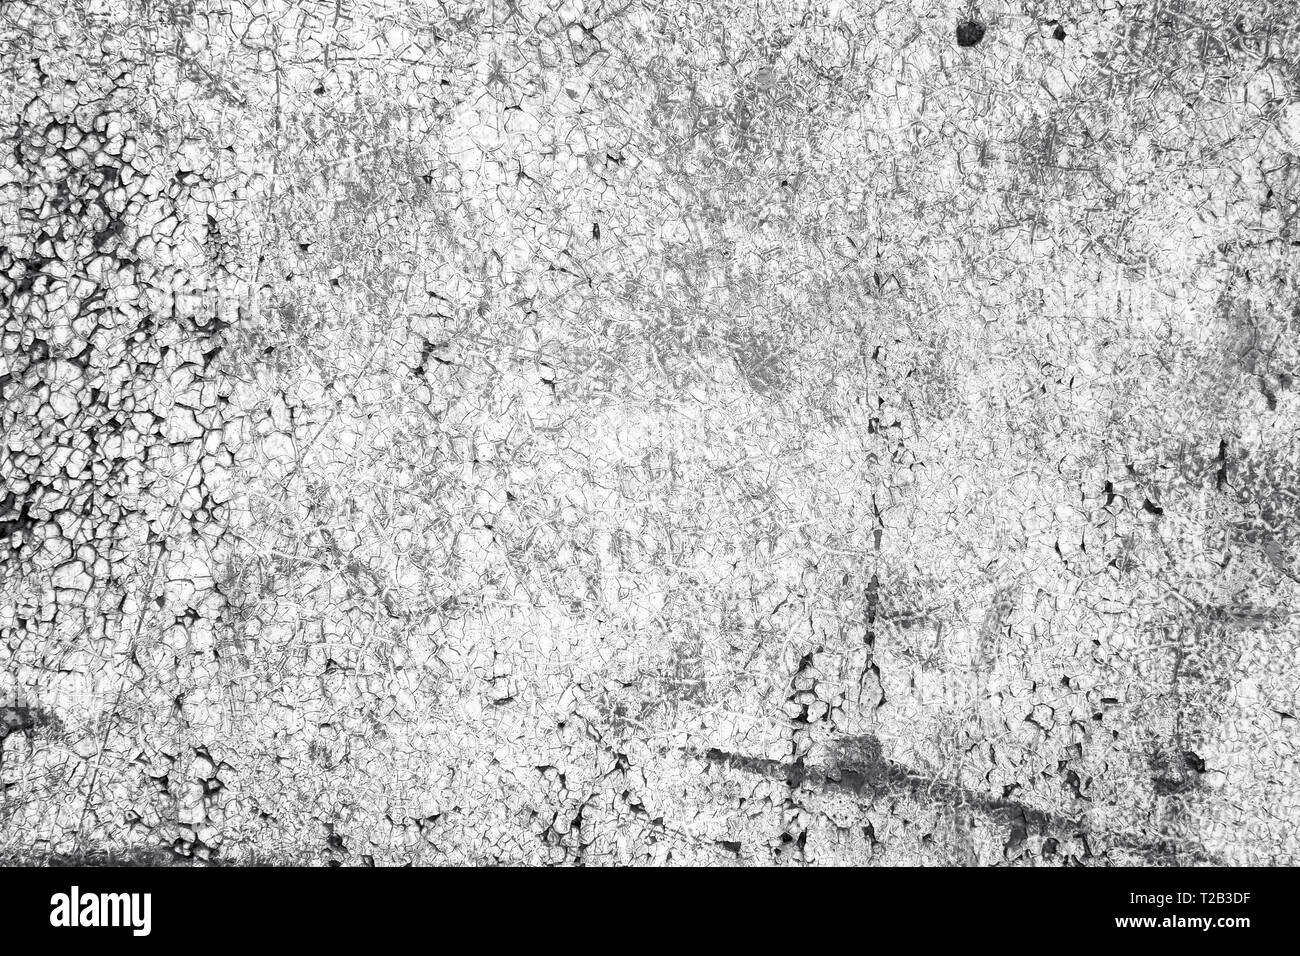 Old Damaged Metal or Steel Surfaces Painted by White Color as Grunge Industrial Background Stock Photo